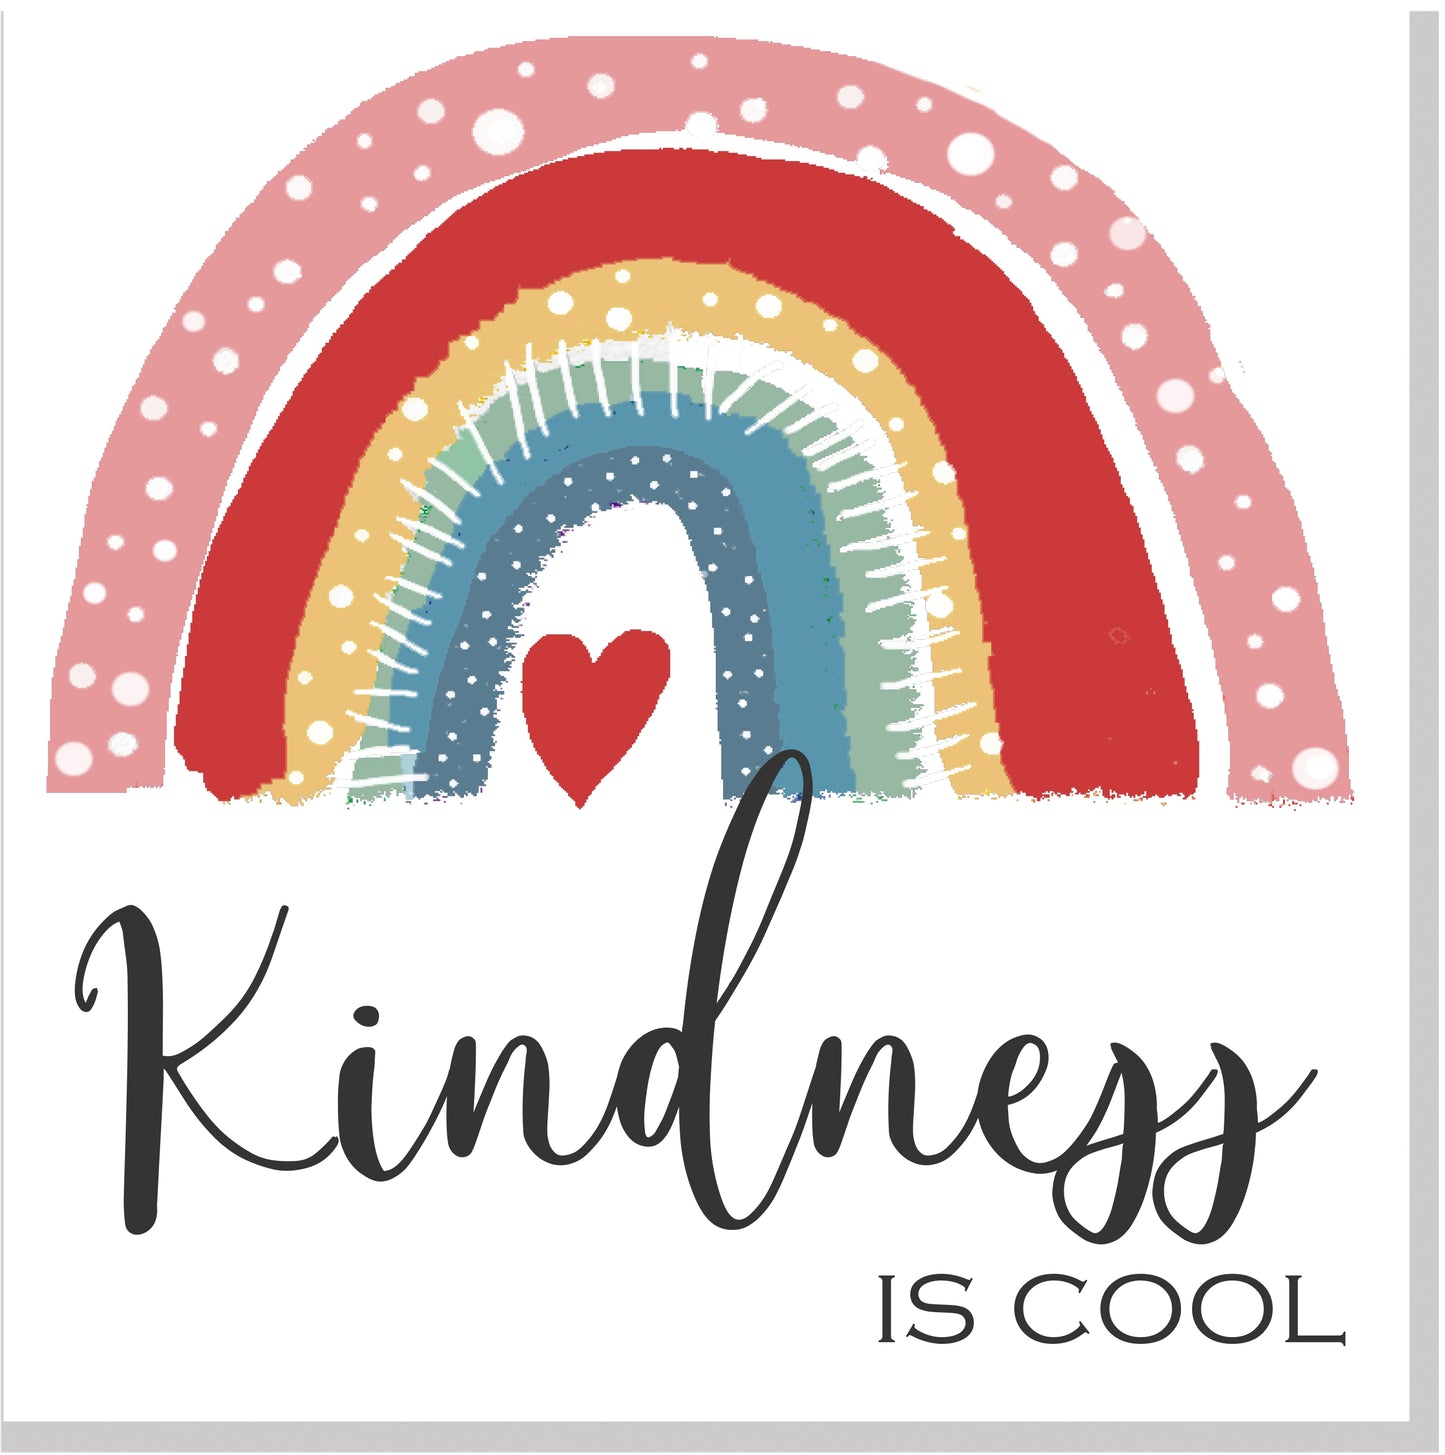 Kindness is cool Rainbow square card